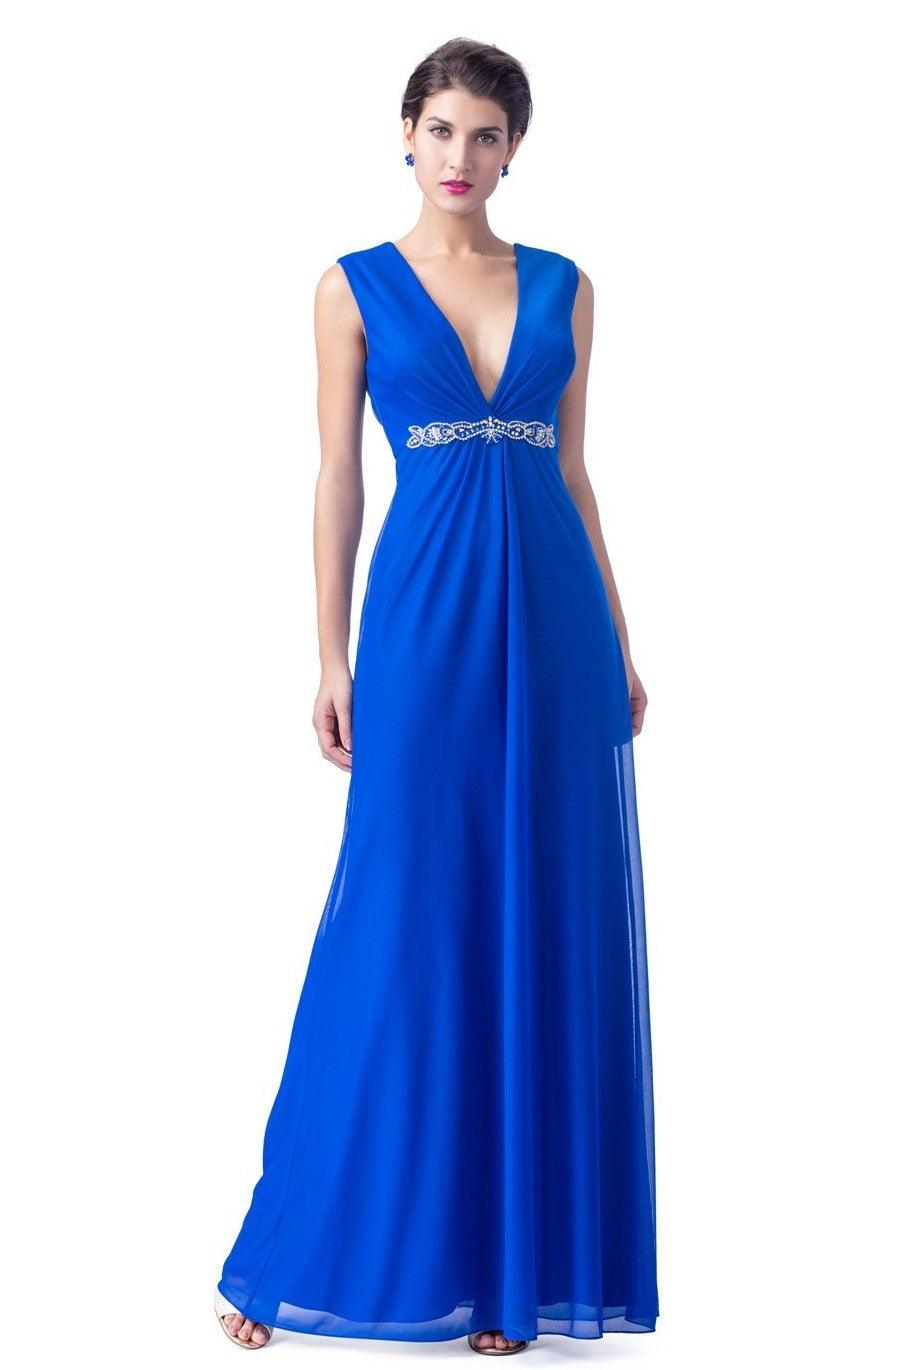 INDIA WAS £225 NOW - Adore Bridal and Occasion Wear